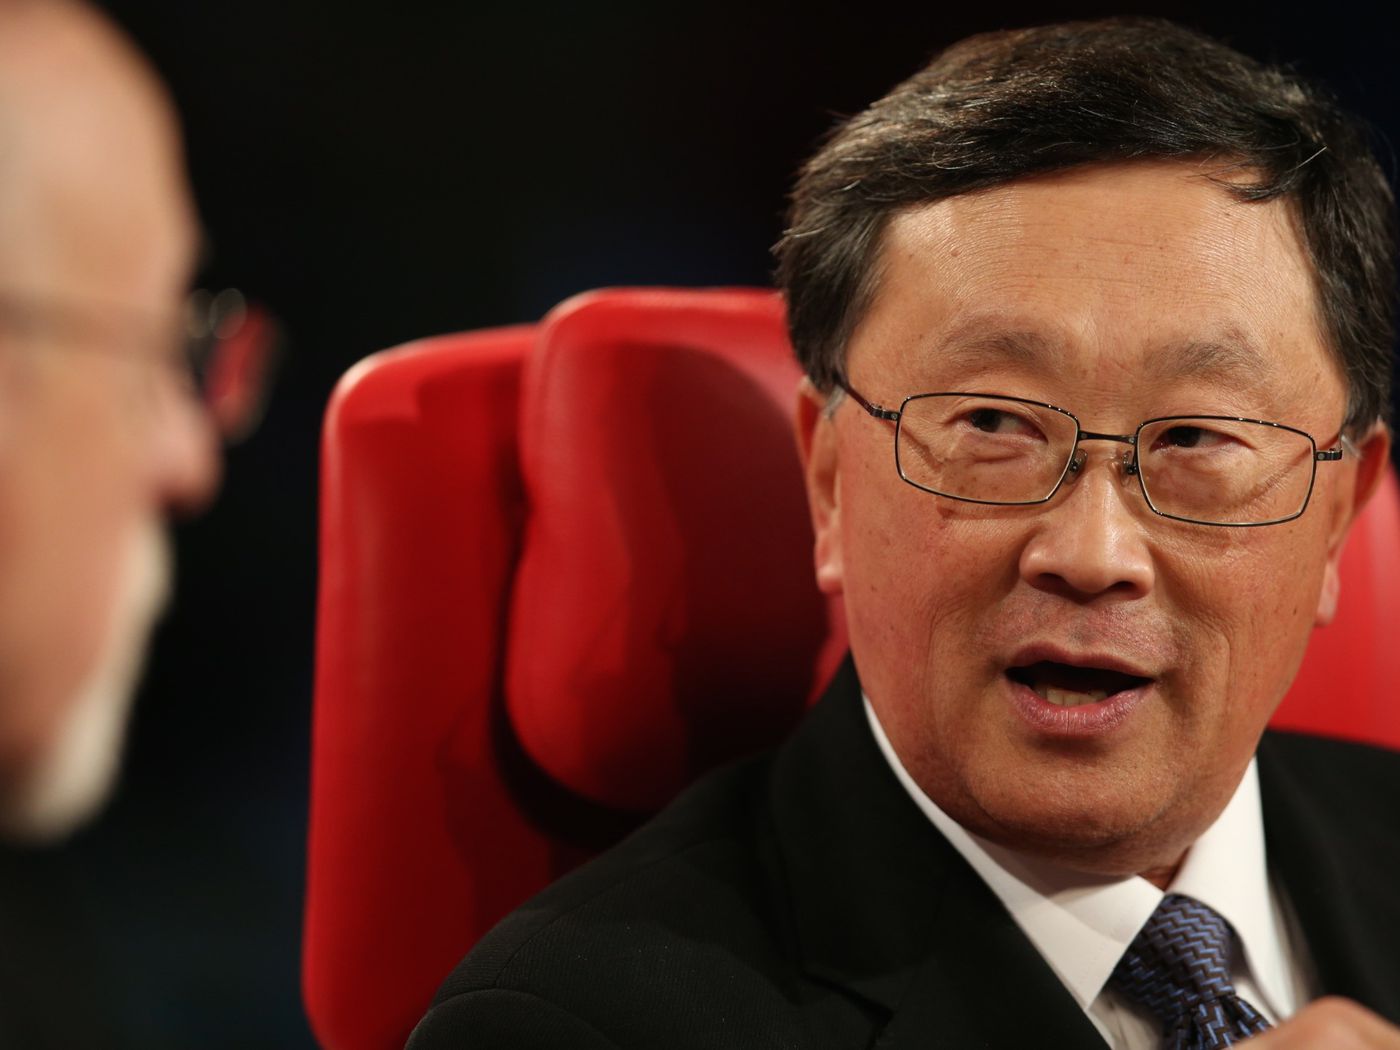 CEO of BlackBerry Is Facing Accusations of Coercing a Staff Member Into Submission